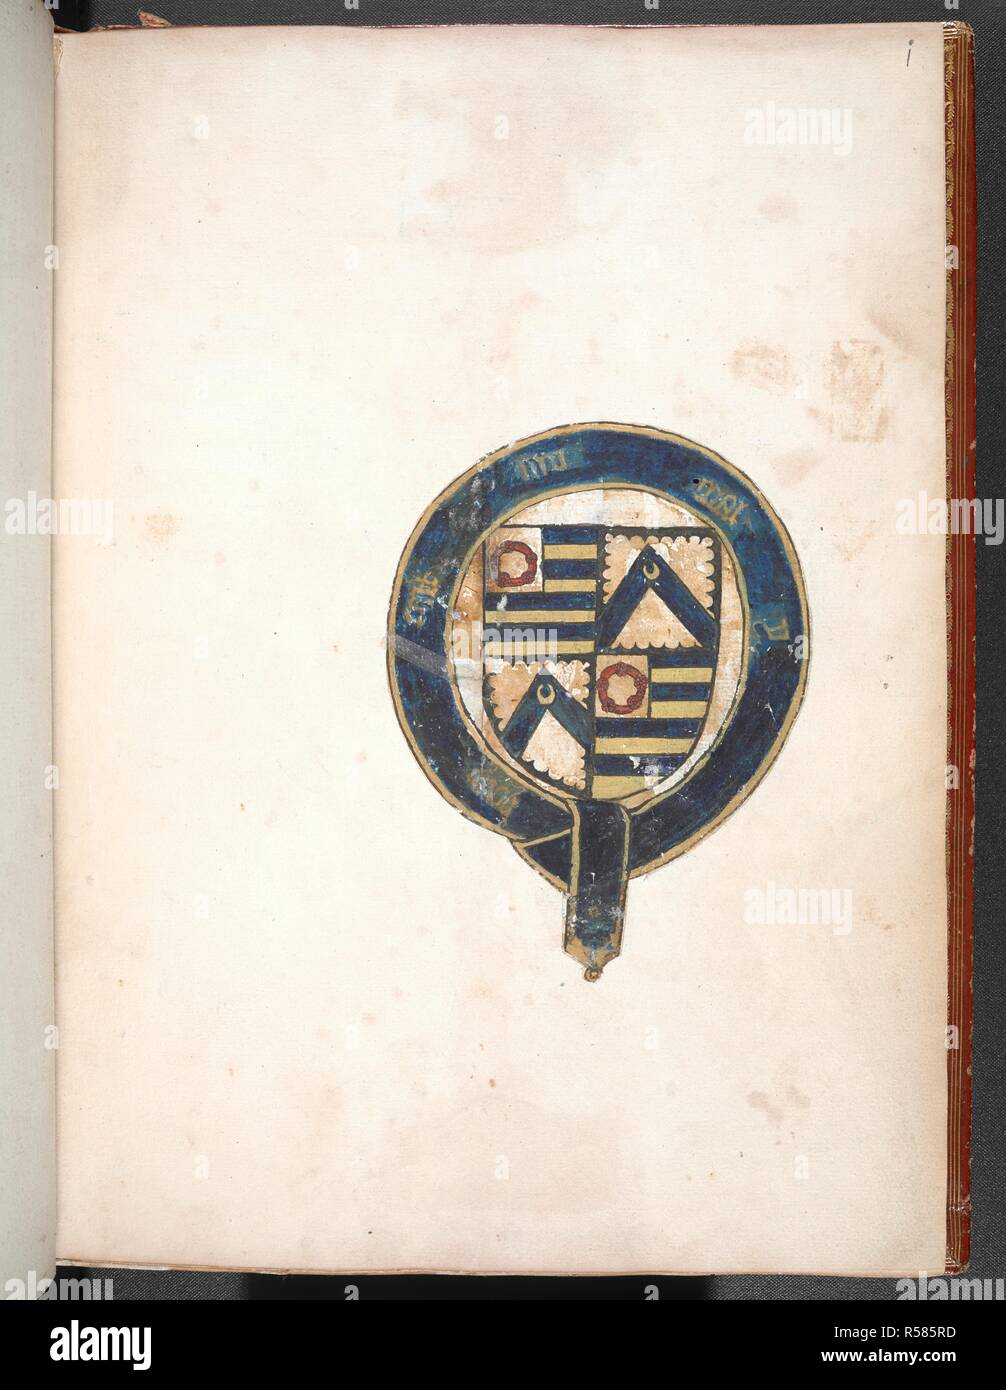 Coat of arms of Sir Thomas Holme. Sir Thomas Holme's Book of Arms: anonymous verses on the kings of England ... (Folios 1 to 8v). England, S. E. (probably London); c. 1445-c. 1450. Numerous coloured drawings of English kings in armour and tabard, presenting a plaque with verses. Source: Harley 4205 f.i. Language: English. Gothic cursive. Stock Photo